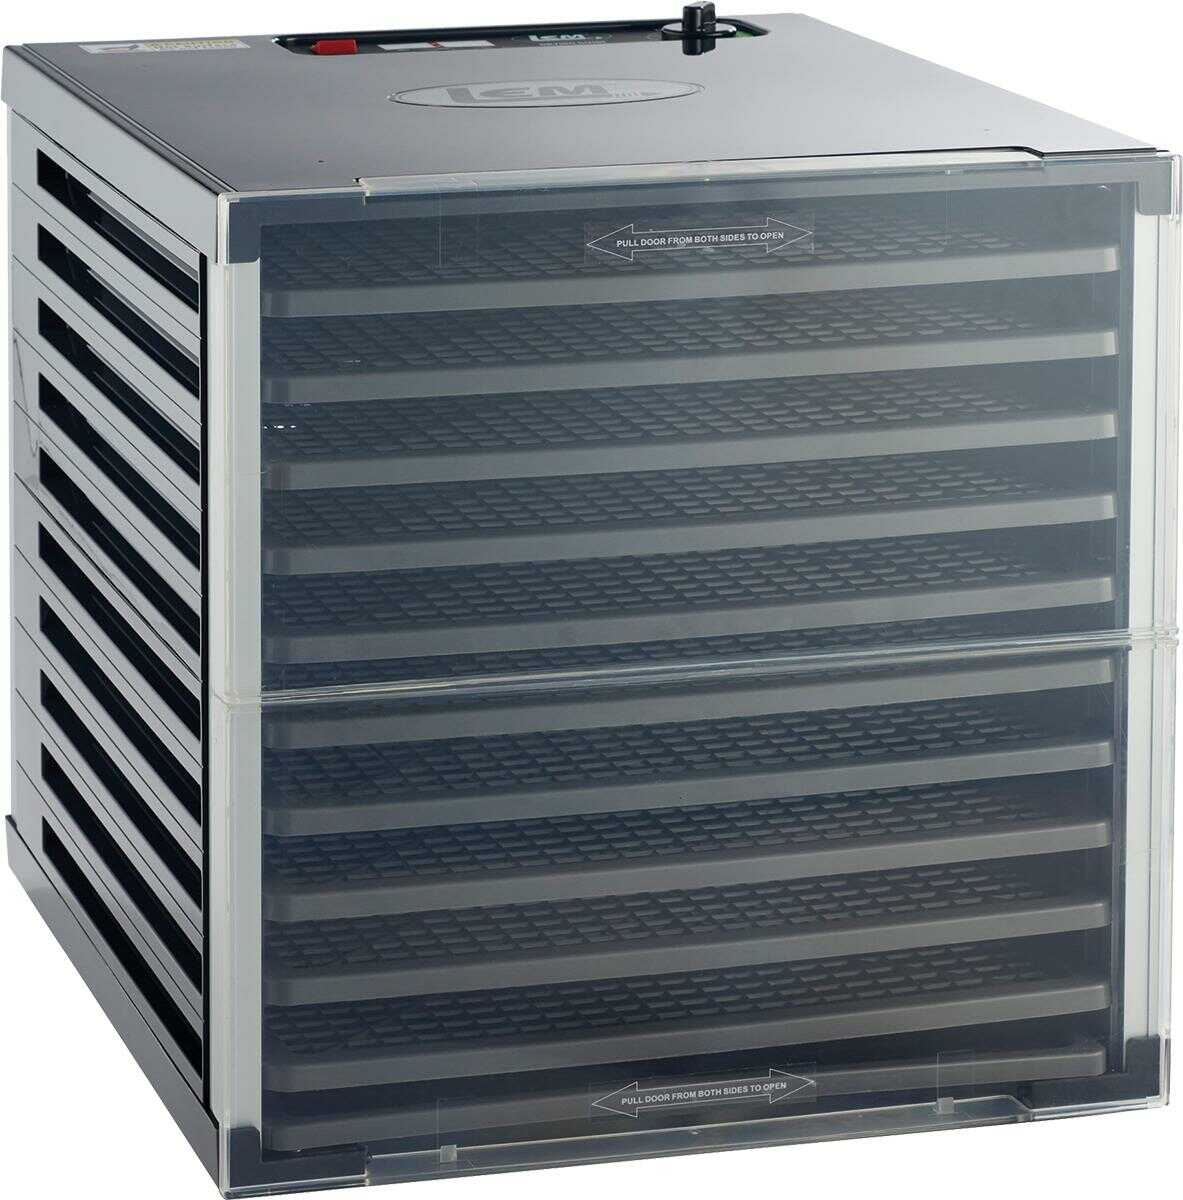 Lem Products Mighty Bite 10-Tray Countertop Dehydrator